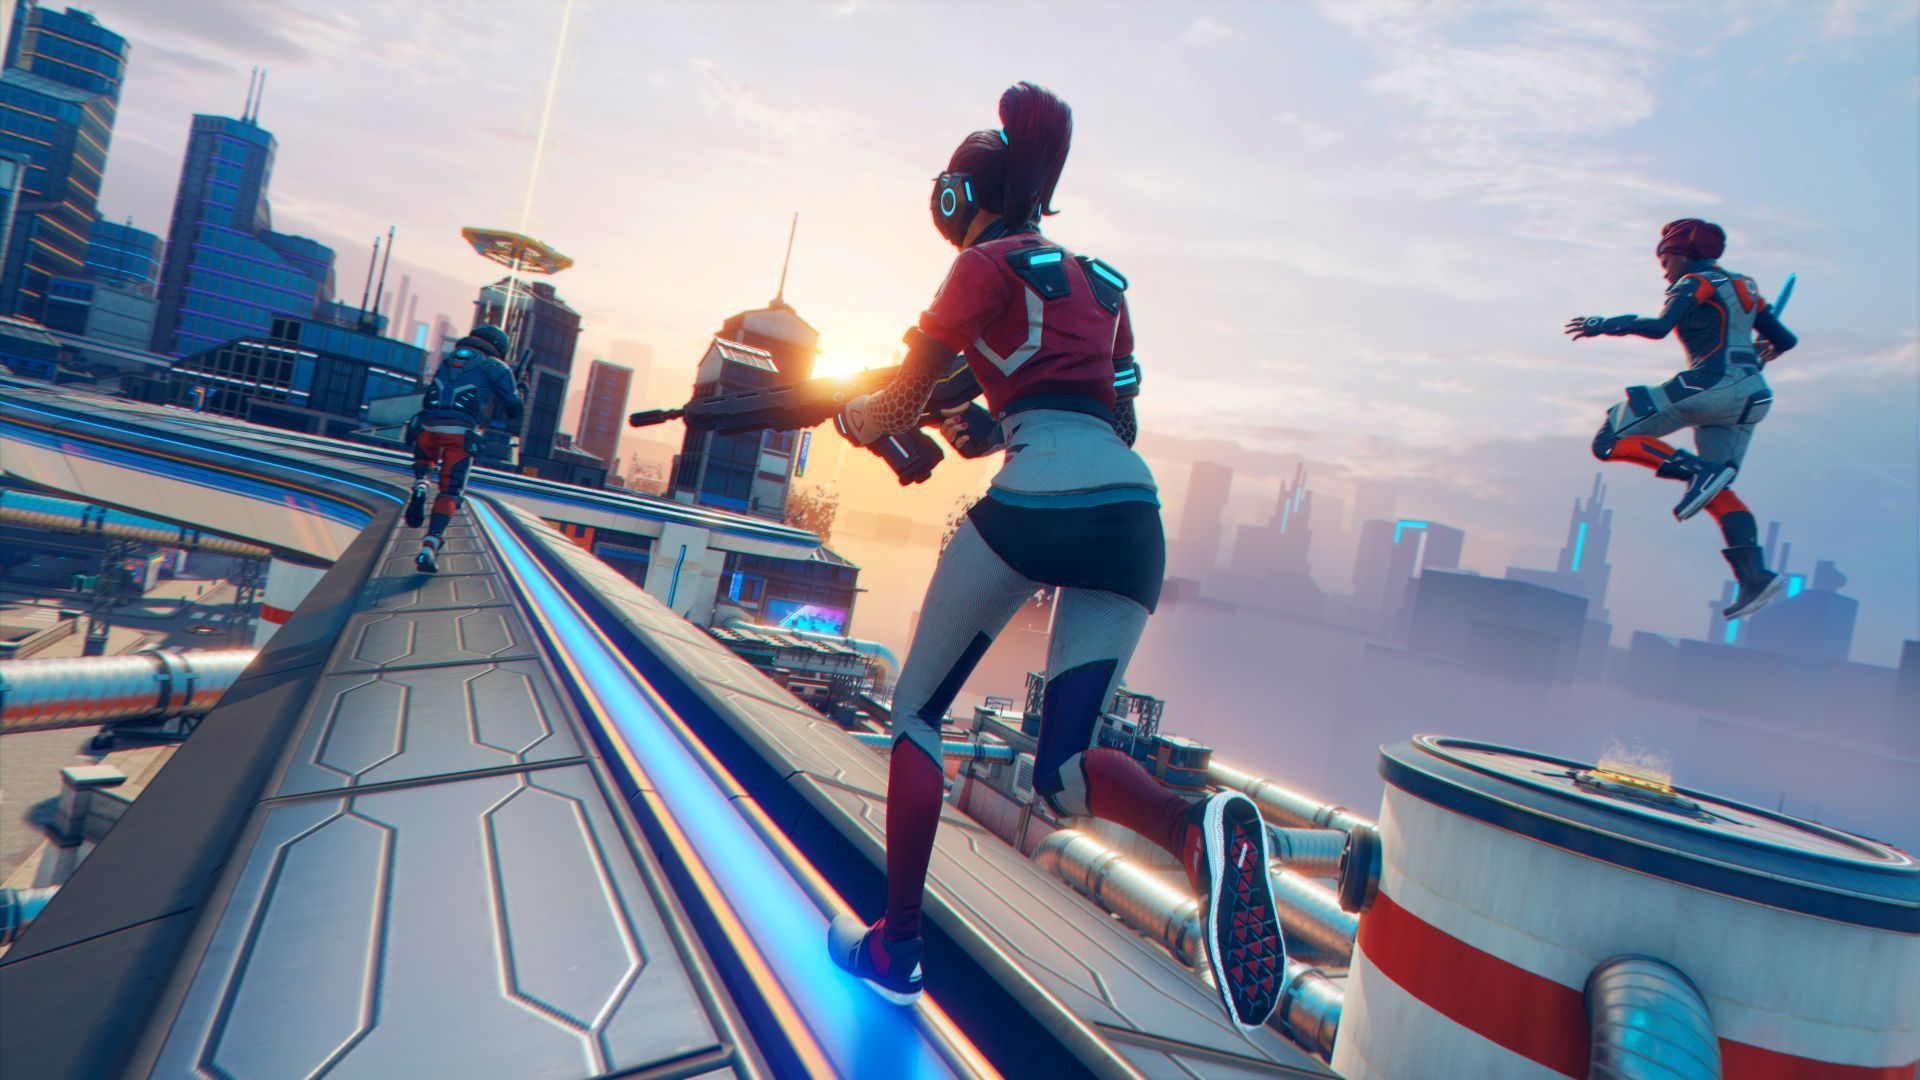 Hyper Scape is official, Ubisoft's new Battle Royale Shooting Game